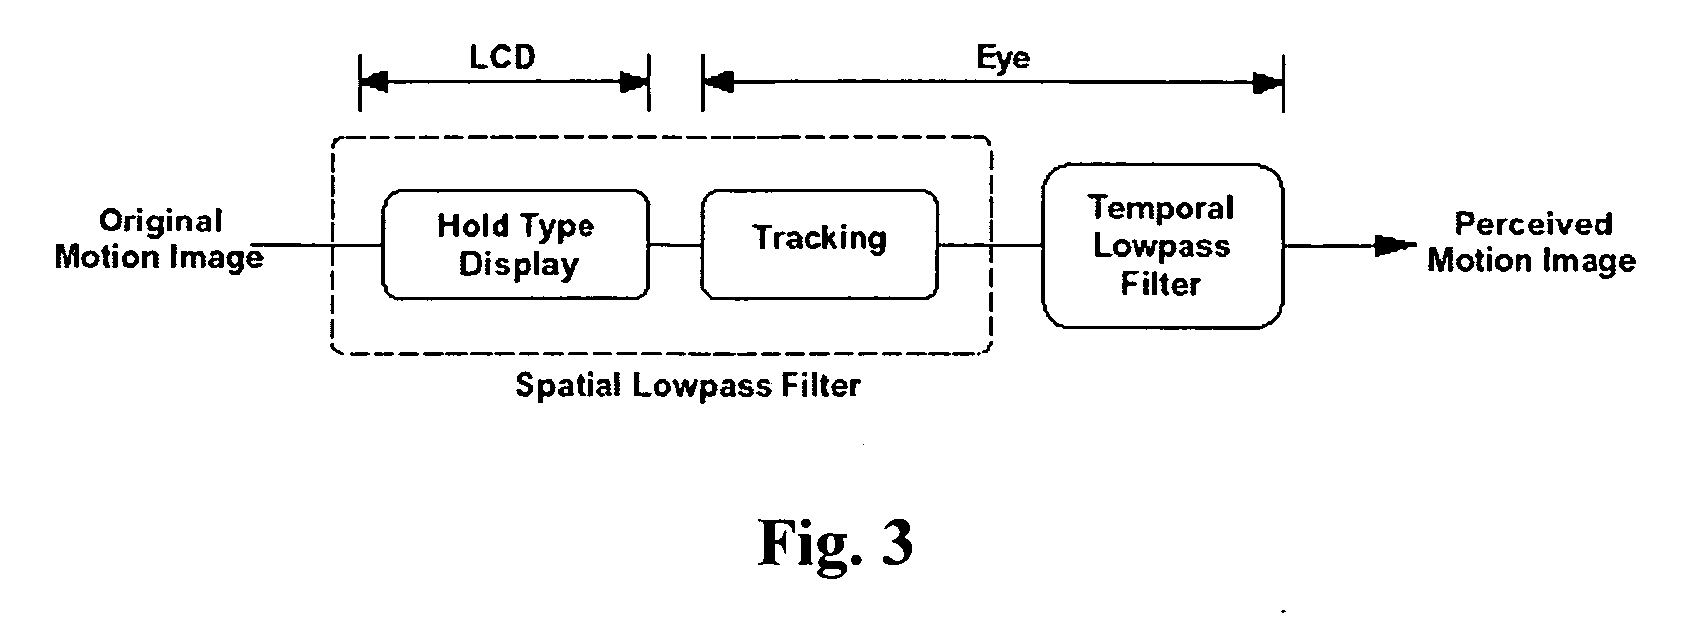 Method and system for estimating motion and compensating for perceived motion blur in digital video